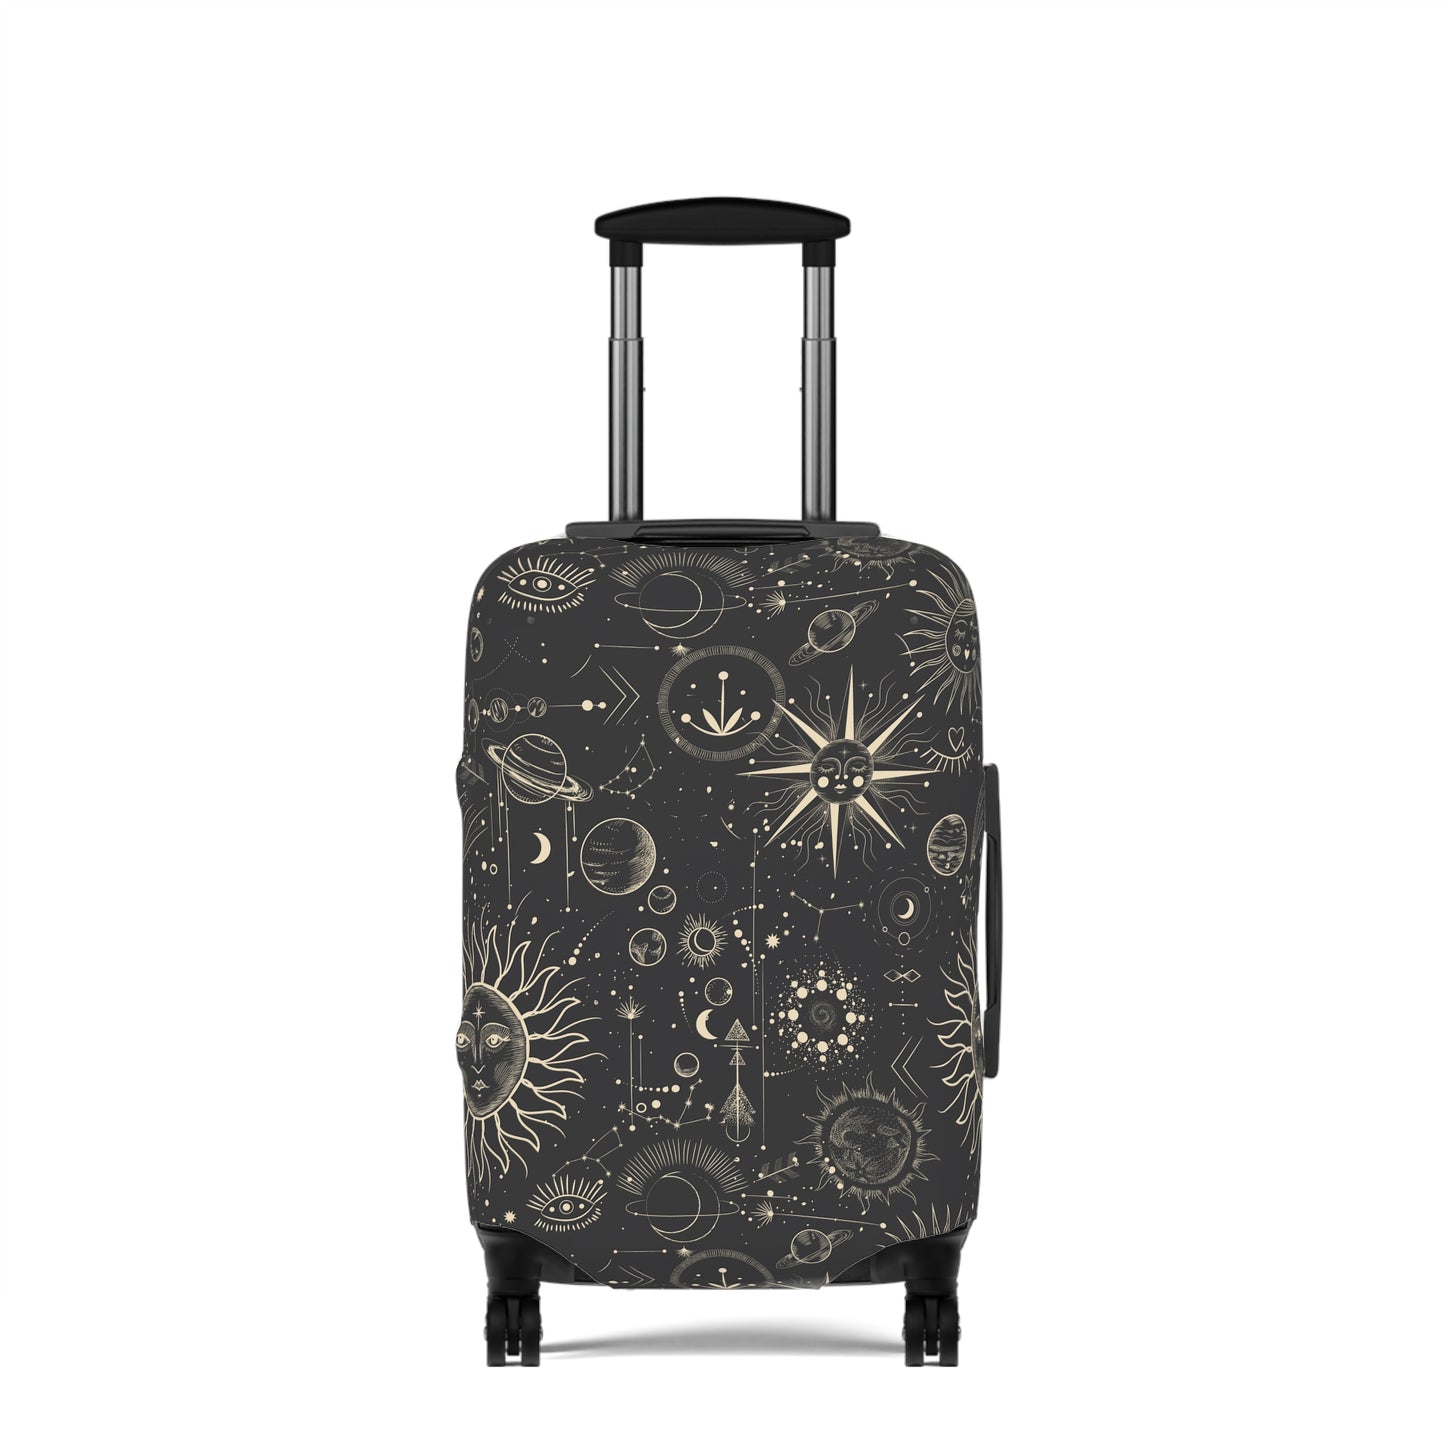 Celestial Celebrations Luggage Cover